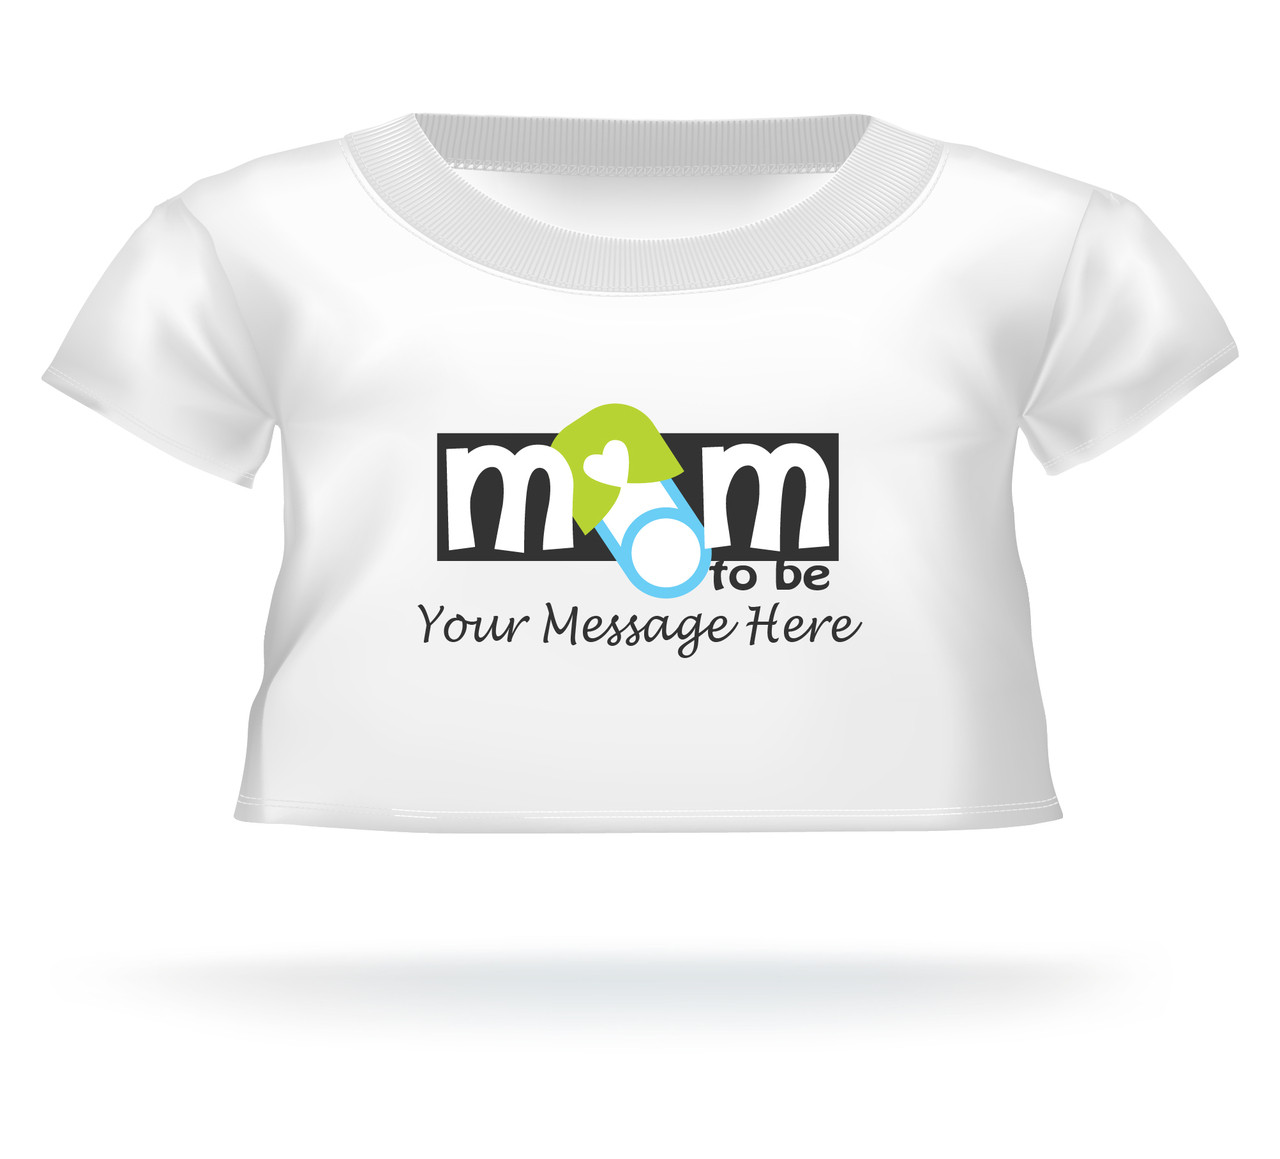 Personalized Giant Teddy Bear shirt for the Mom To Be